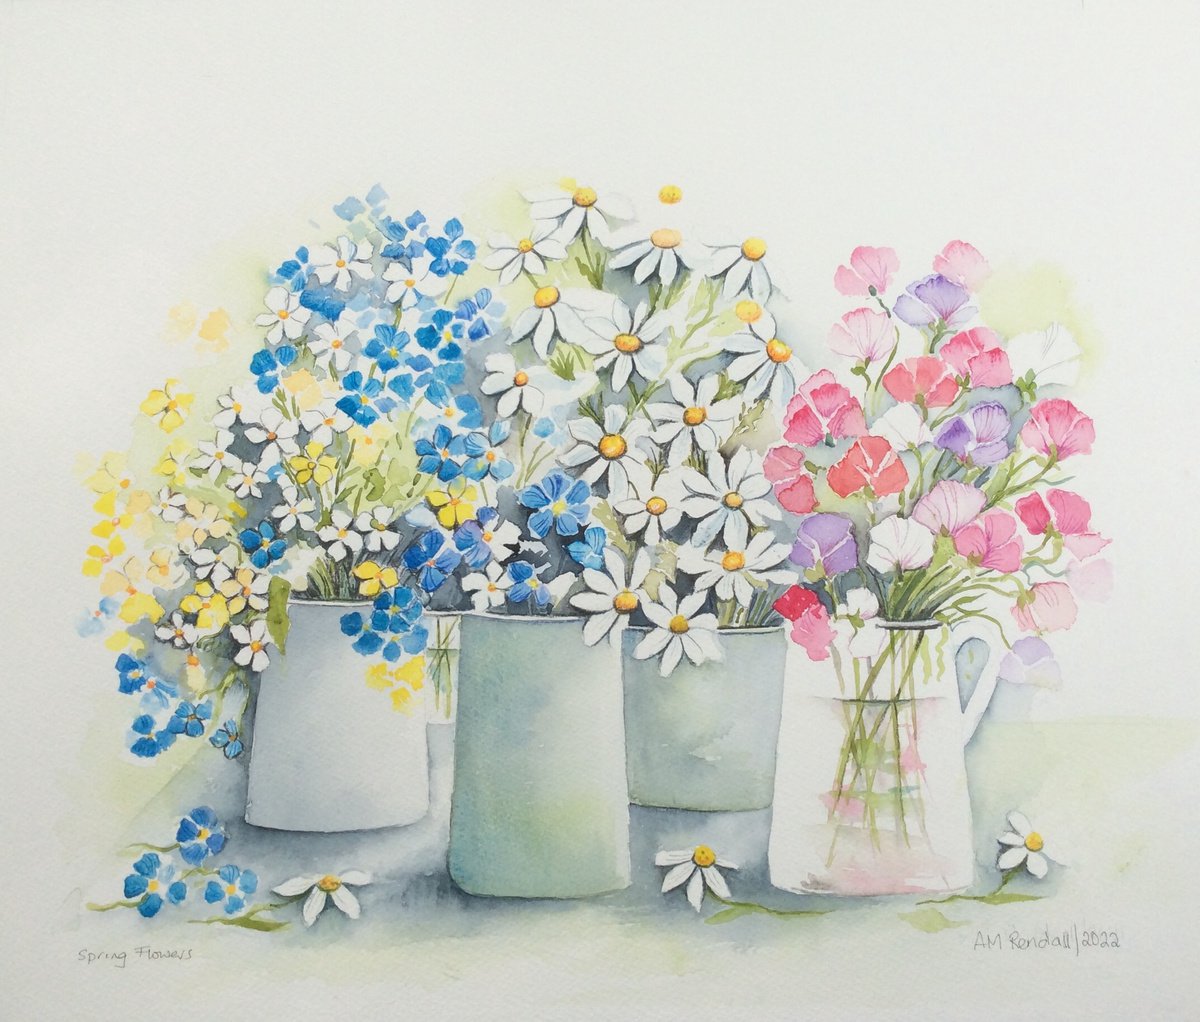 Spring Flowers by Angela Rendall